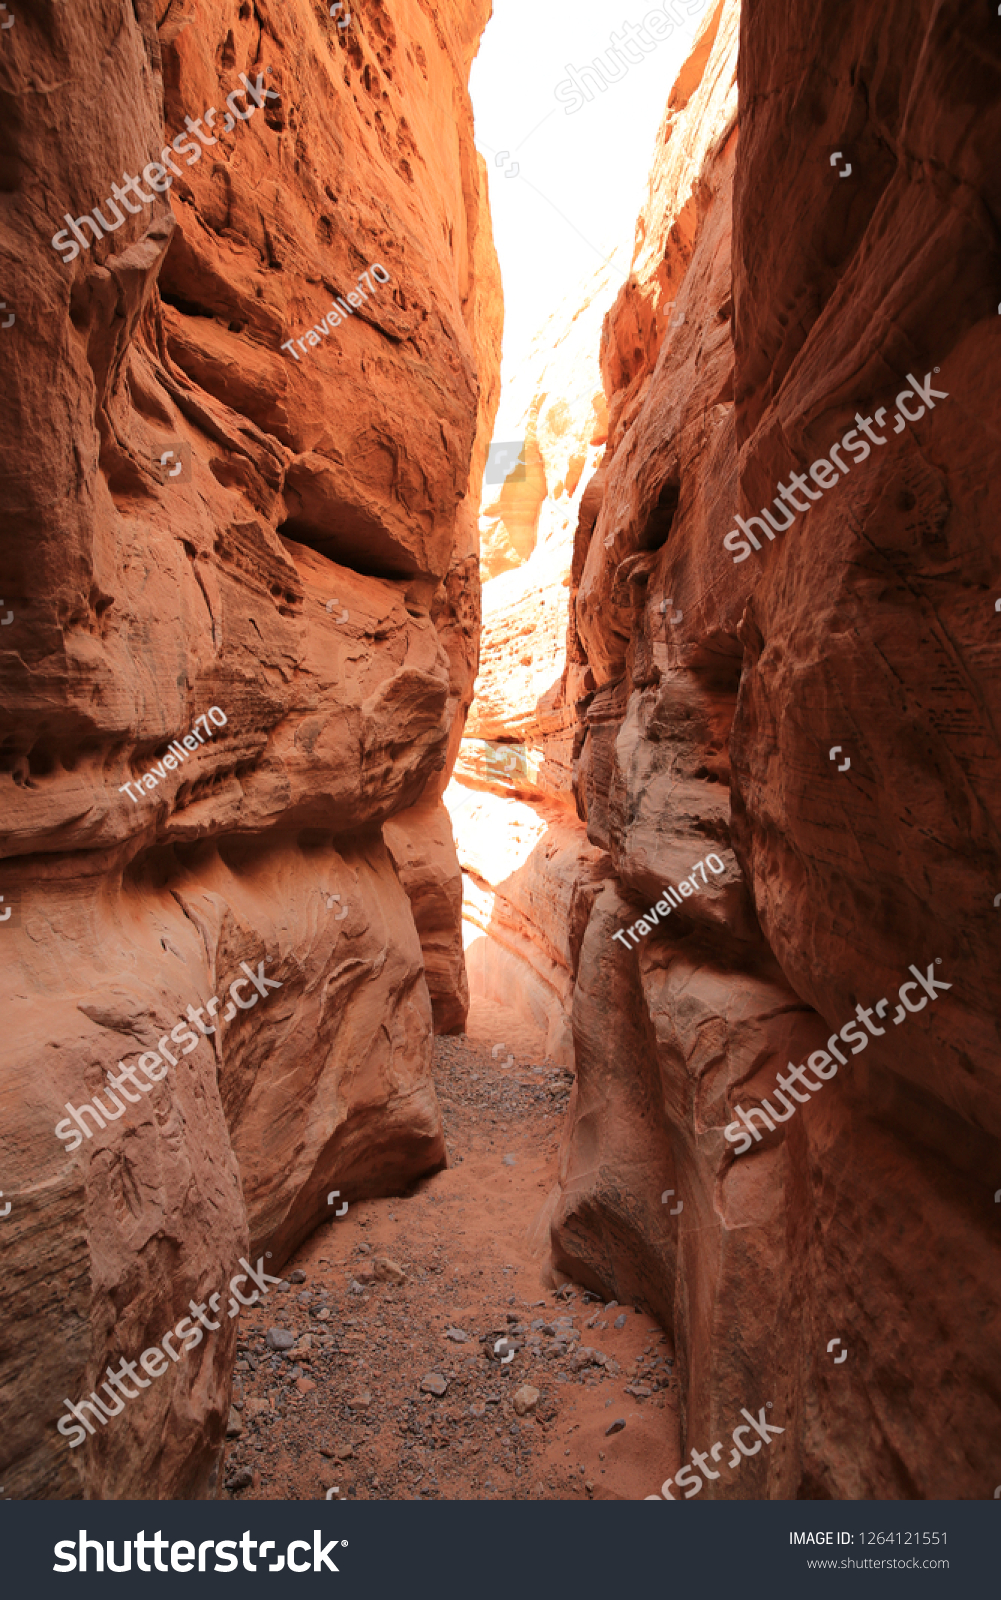 Scenic slot canyon in Valley of Fire State Park, Nevada, USA #1264121551